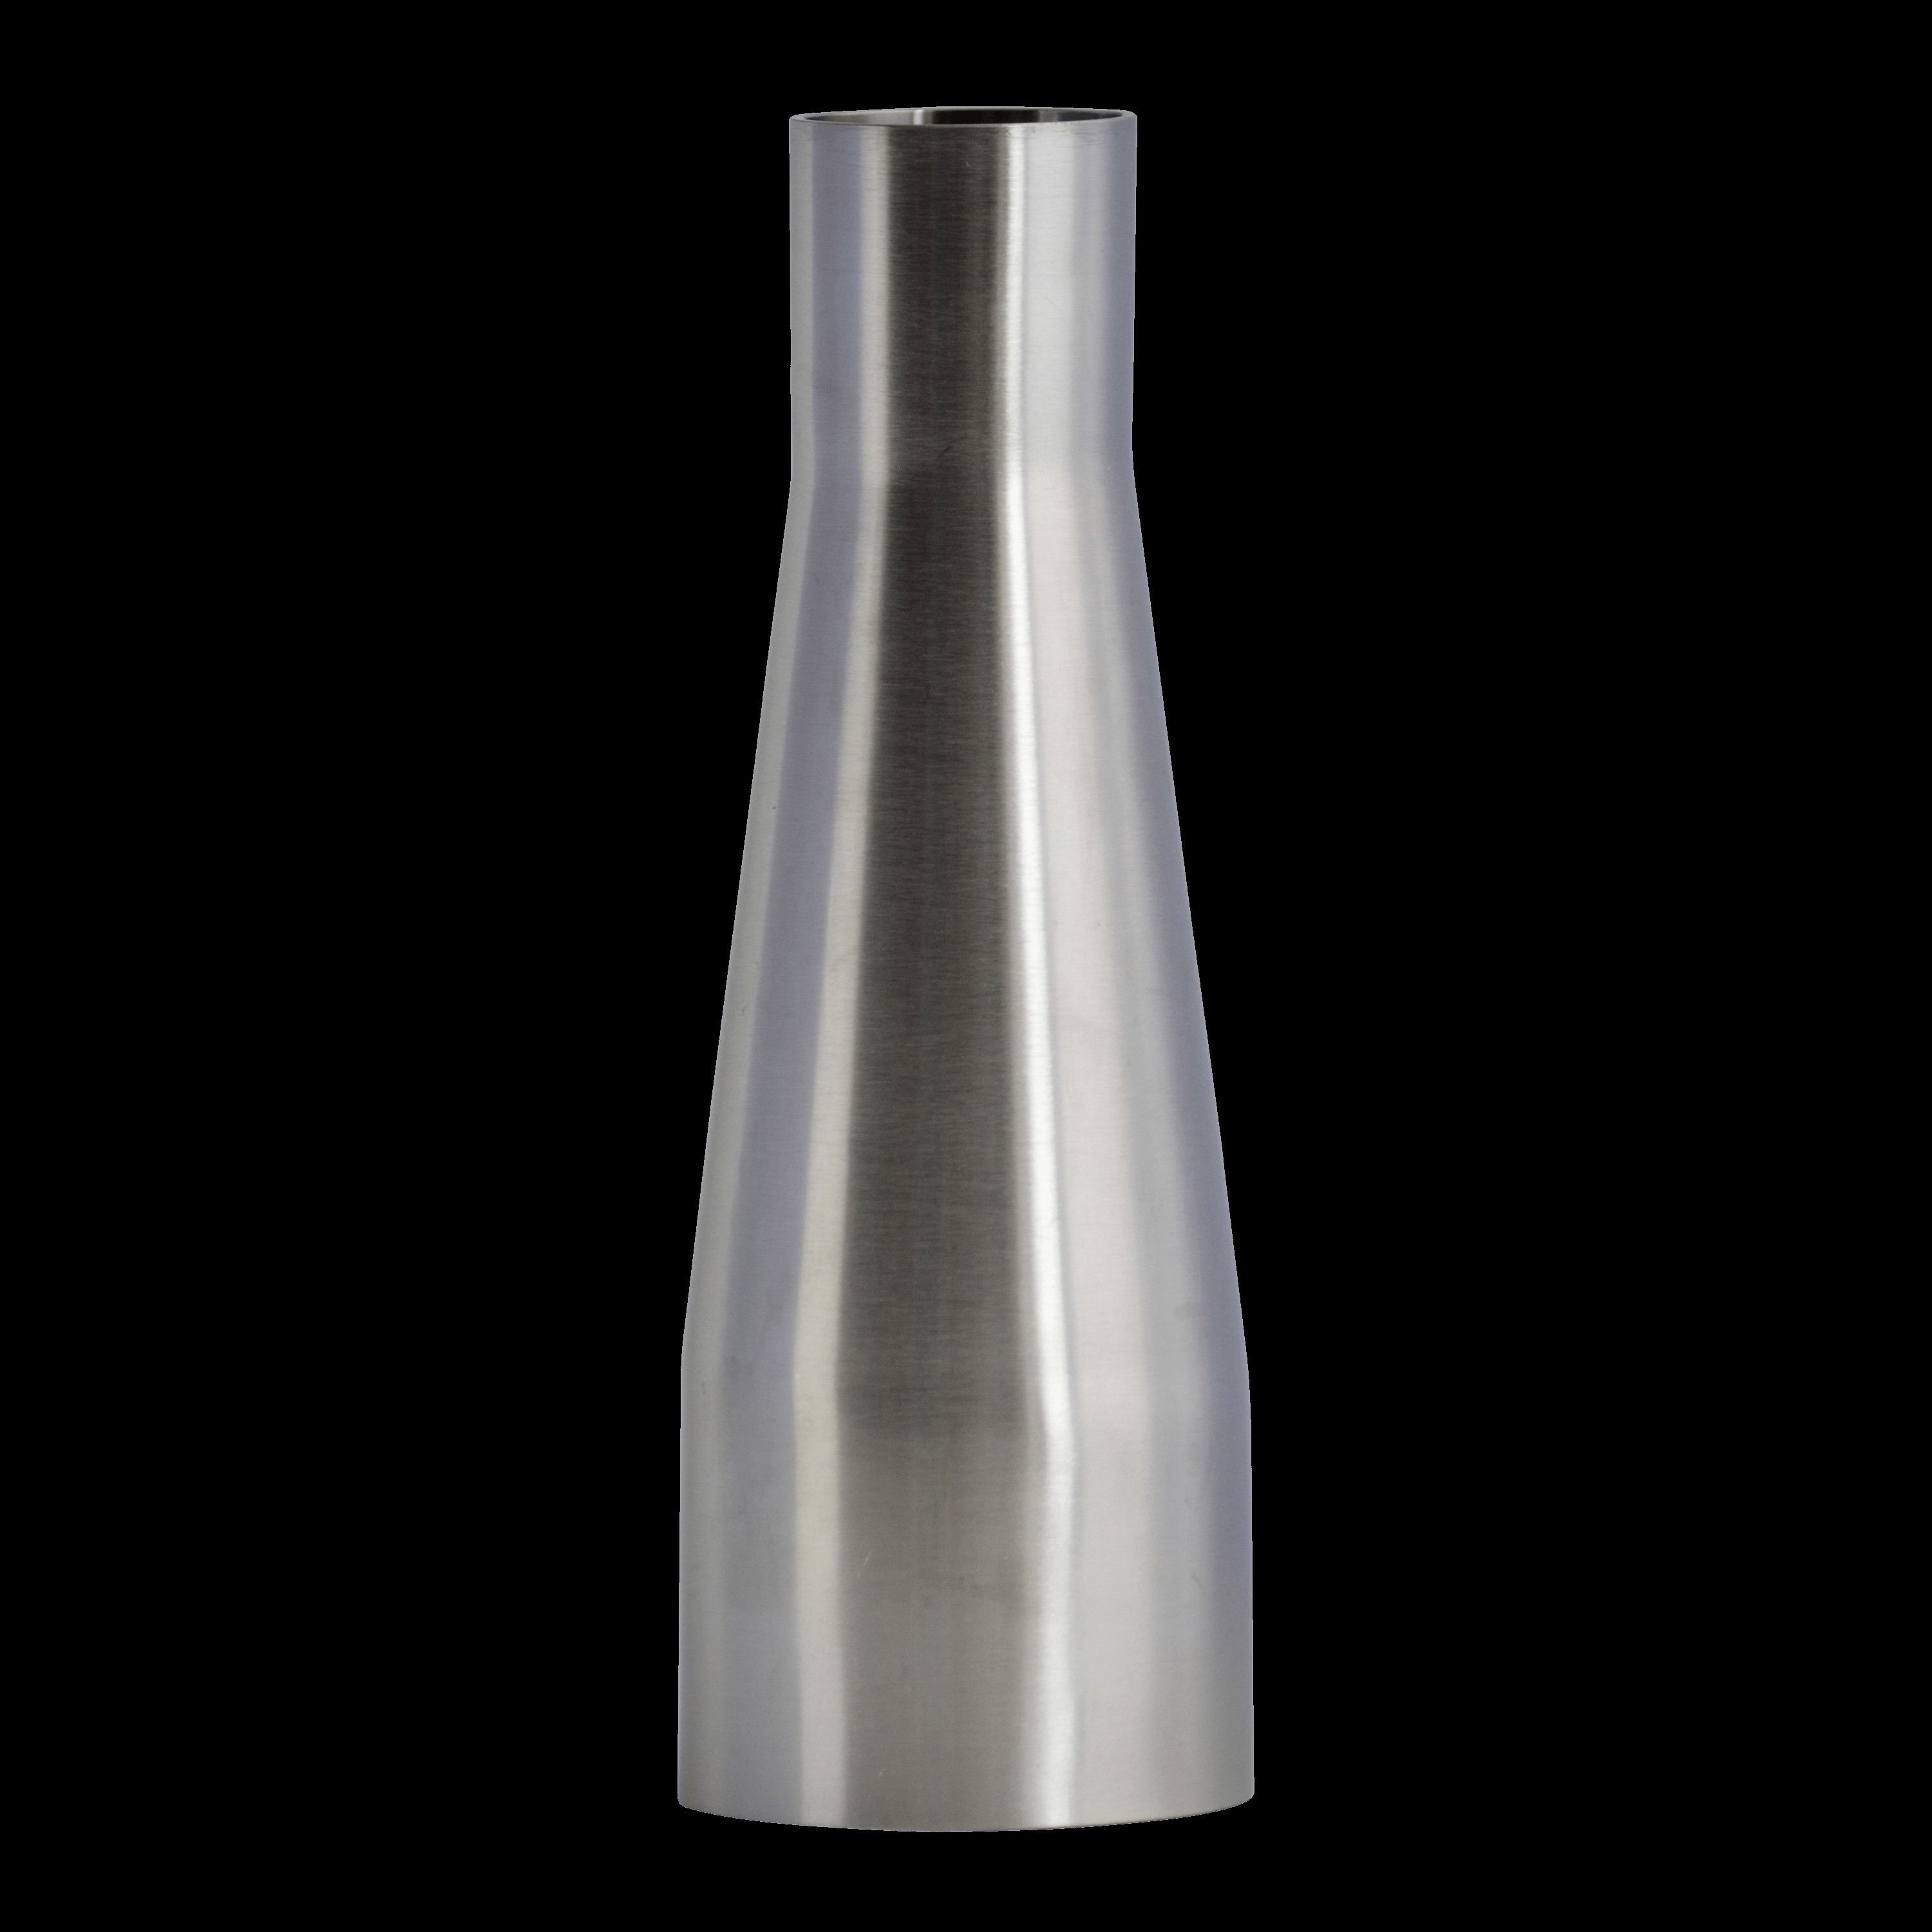 14 Fabulous Glass Cylinder Vase 12 X 5 2024 free download glass cylinder vase 12 x 5 of stainless steel sanitary fittings clamps page 5 top line with regard to tl31 3e280b3 x 1e280b3 reducer concentric weld ends bpe 316l 20ra id 32ra od